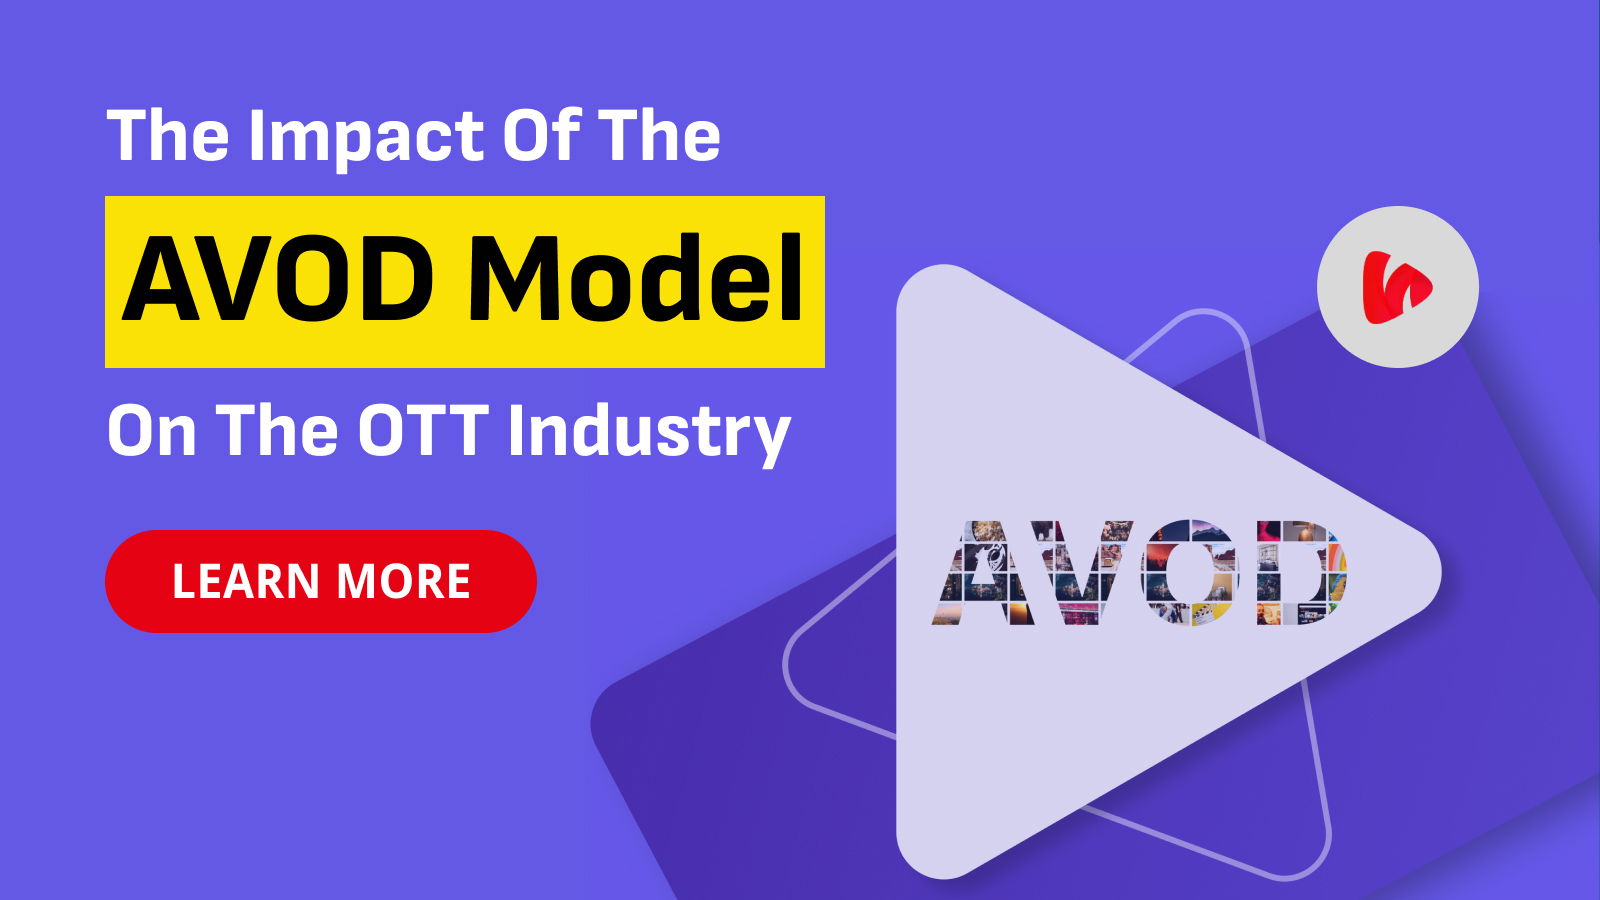 The Impact of the AVOD Model on the OTT Industry